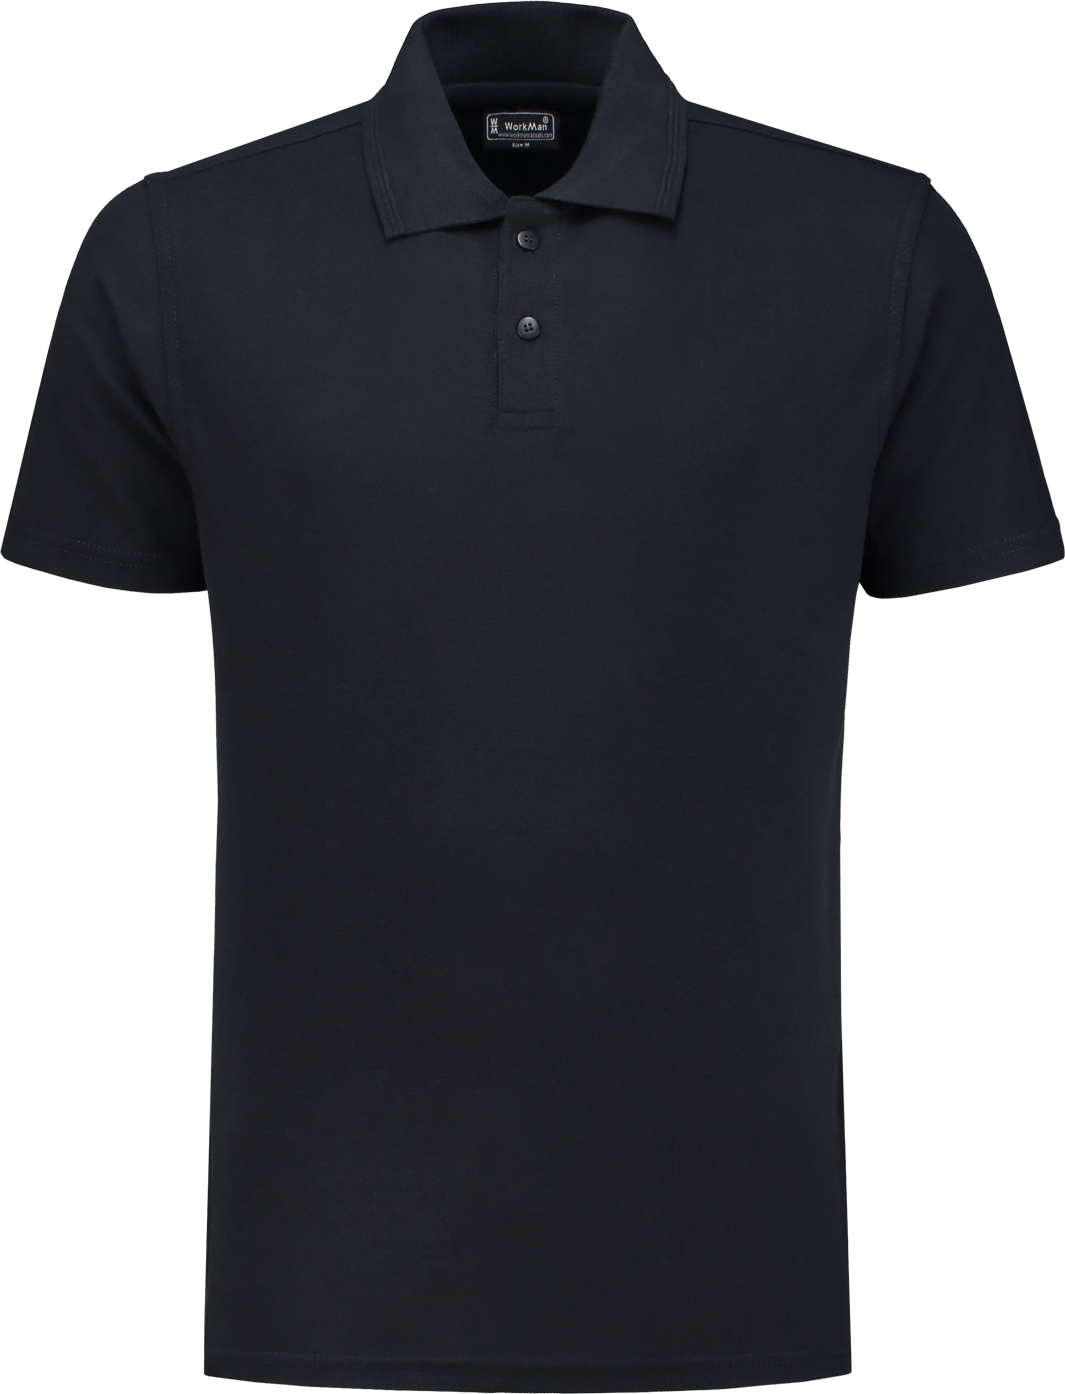 10.6.8102.02 8102 Poloshirt Outfitters Navy M